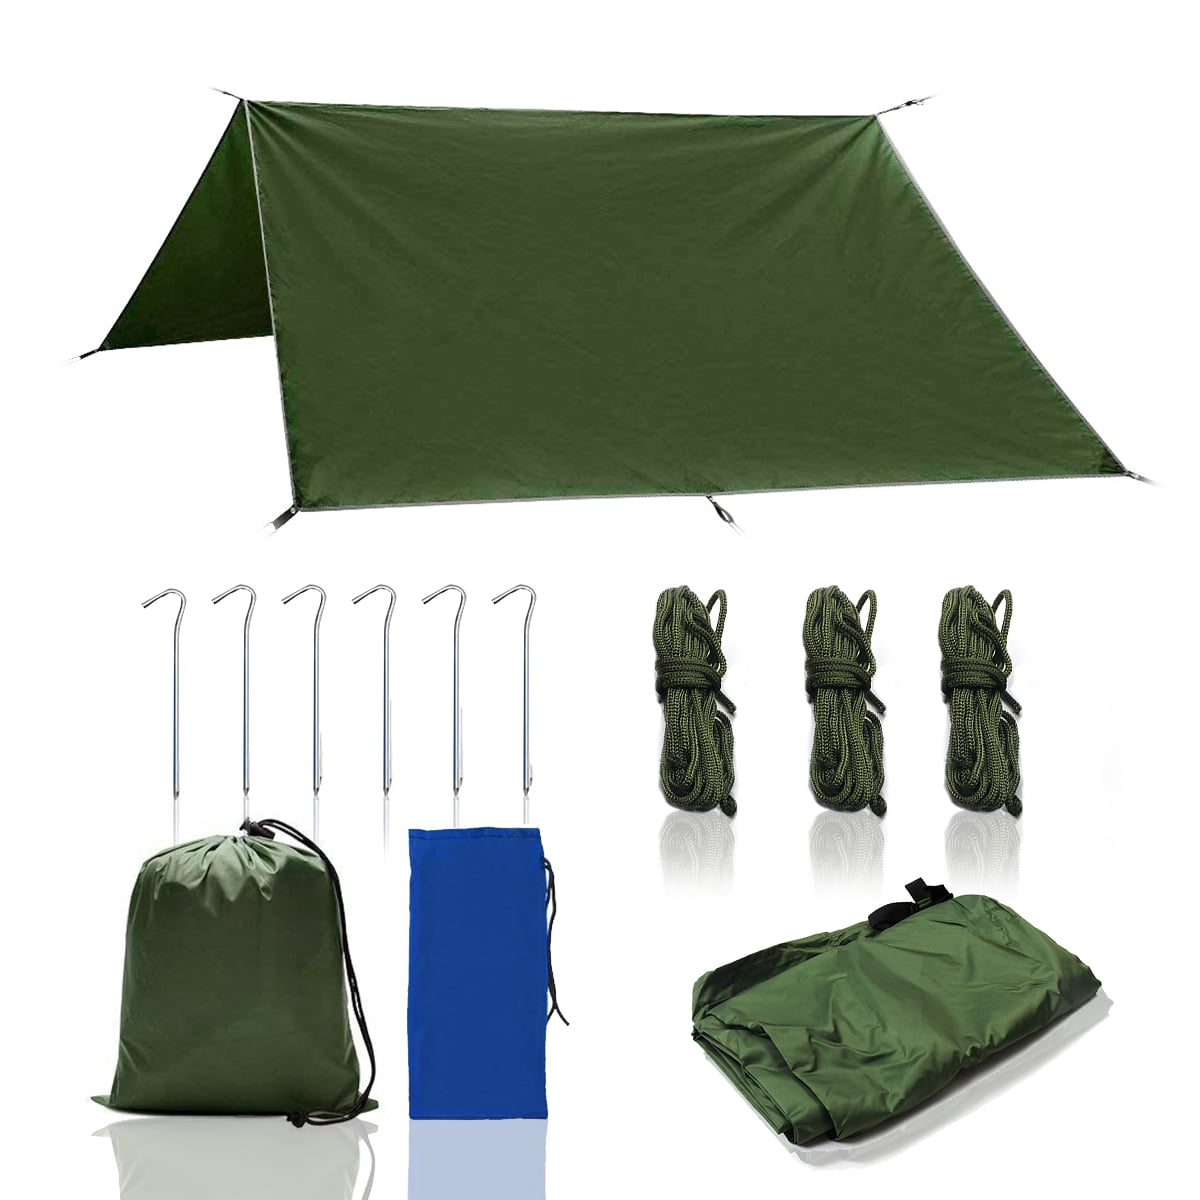 Waterproof Rip Resistant Camping Tarp for Any Weather Use for Shelter Or Sunshade Perfect Tent Cover Or Hammock Rain Fly Great for Hiking Backpacking & Travel